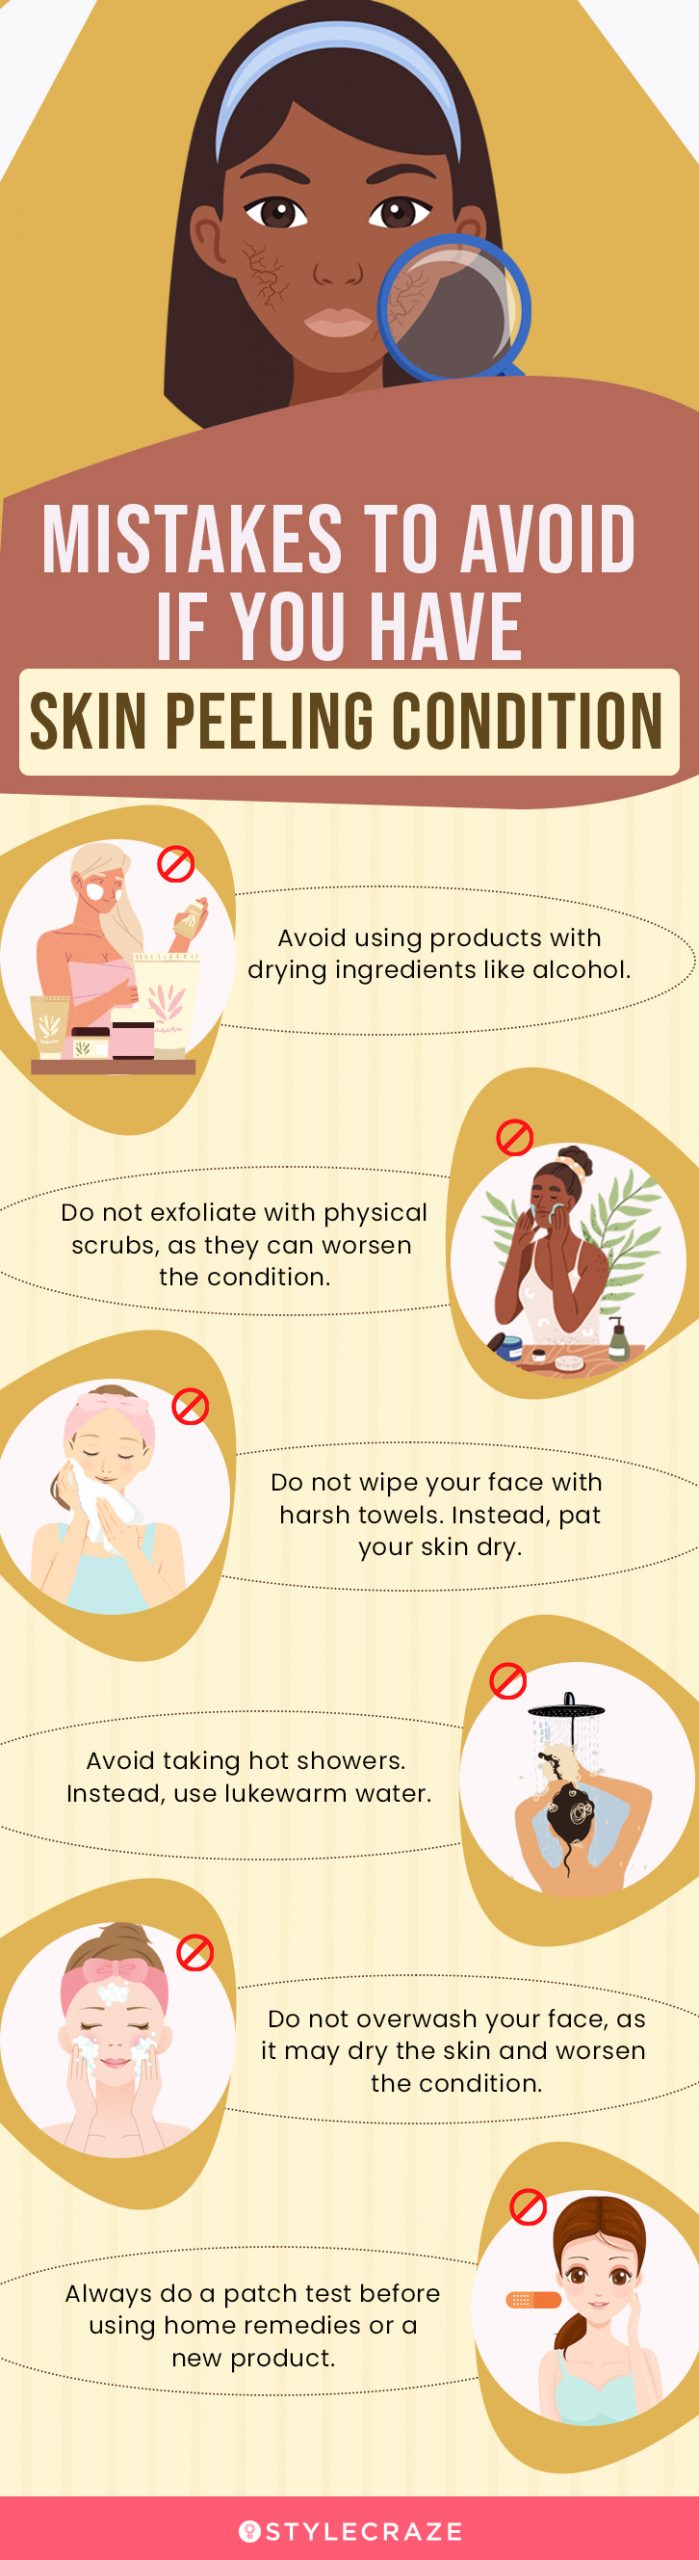 mistakes to avoid if you have skin peeling condition (infographic)